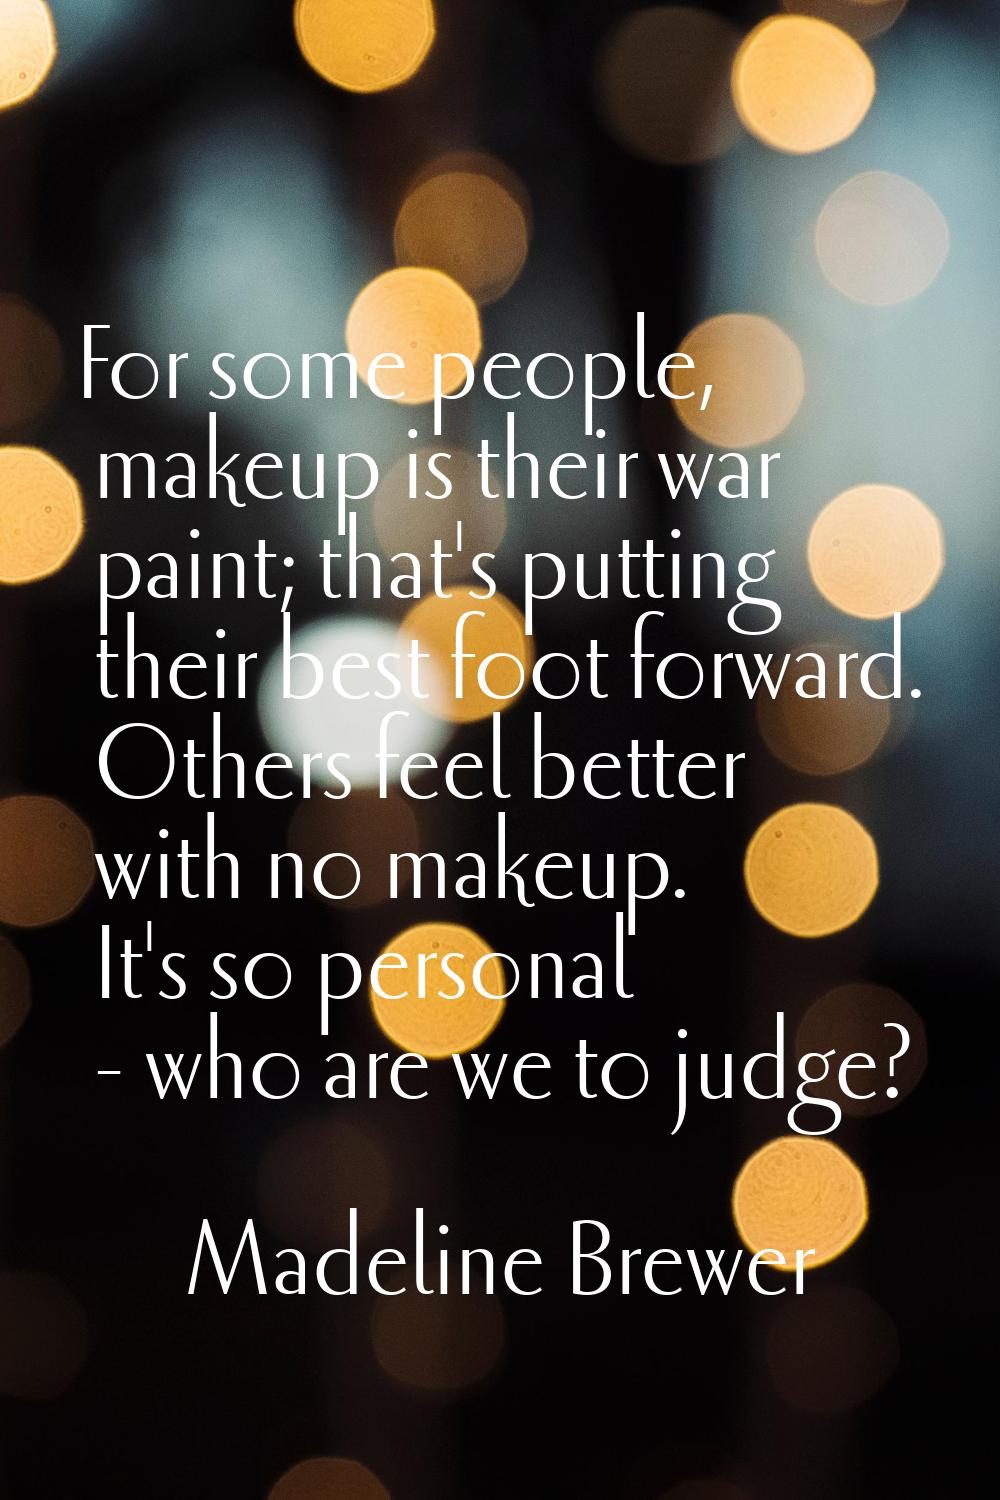 For some people, makeup is their war paint; that's putting their best foot forward. Others feel bet